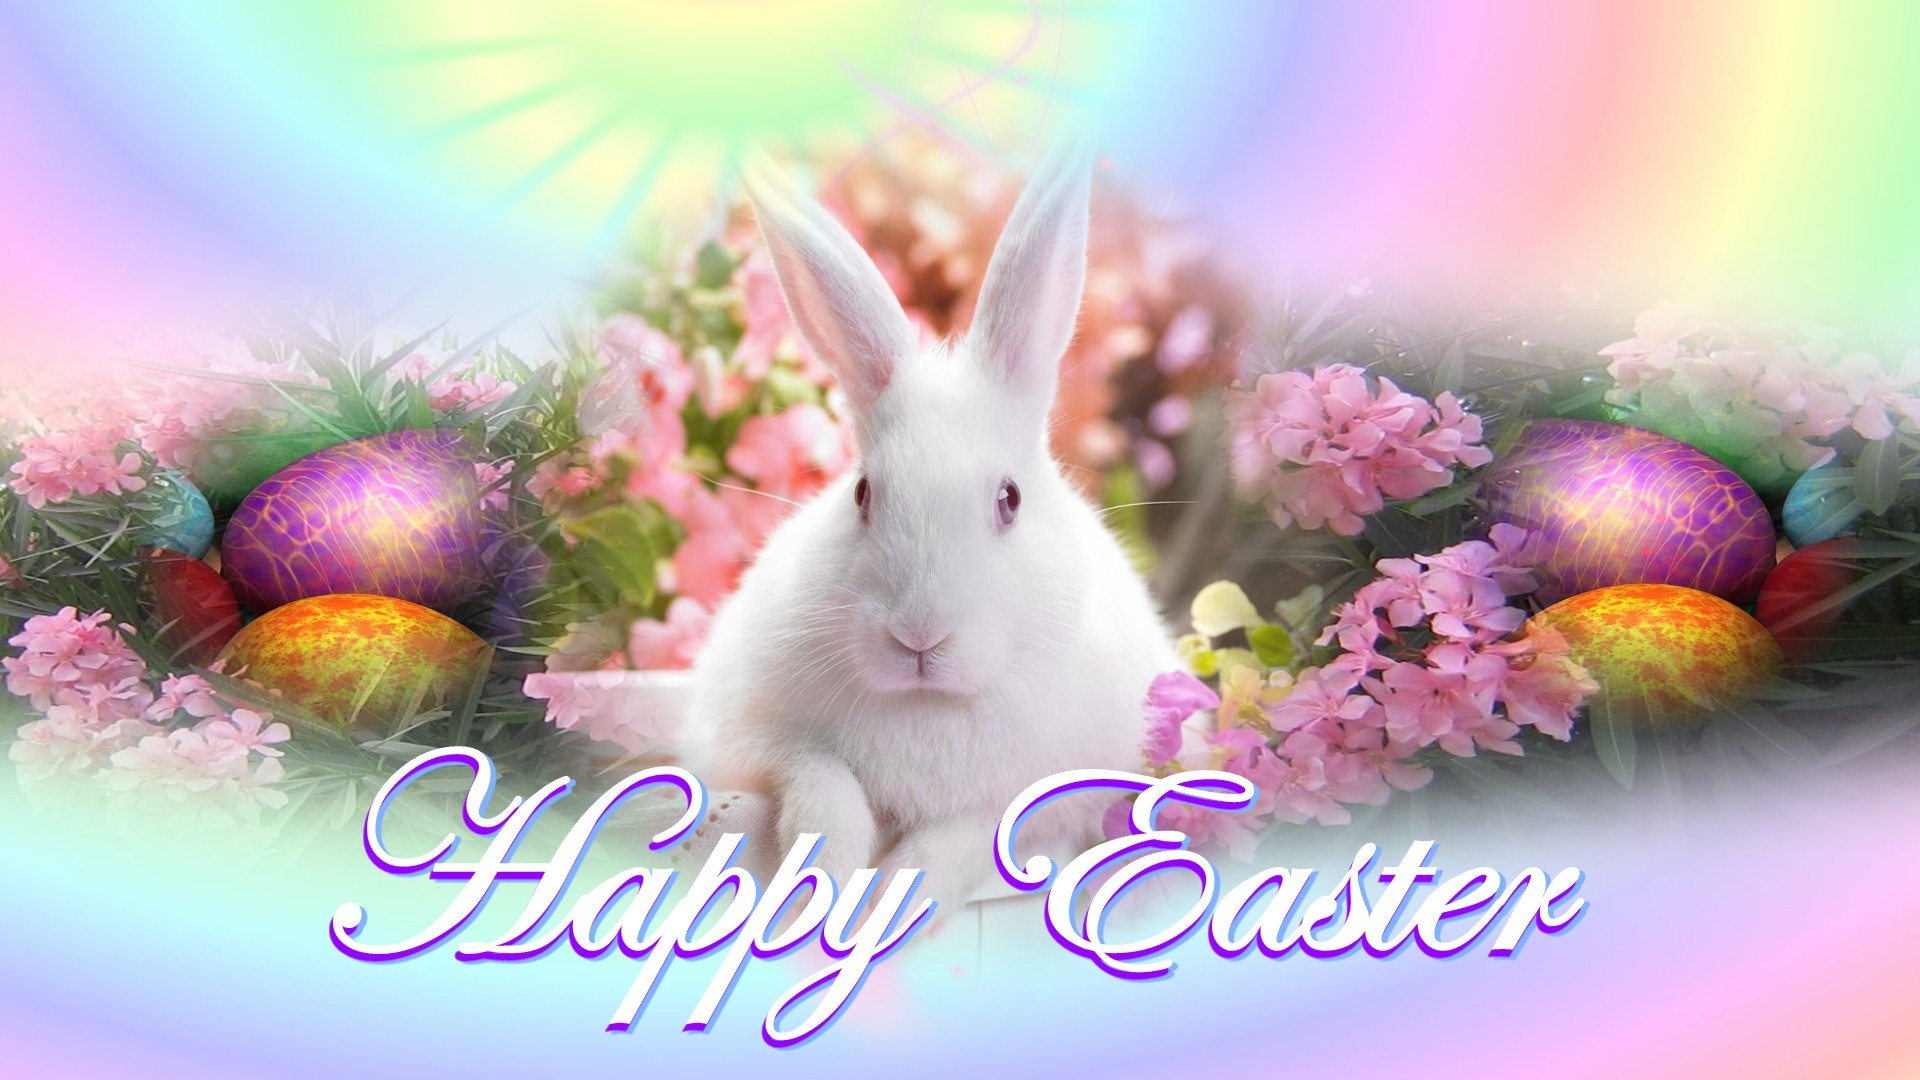 Cute Happy Easter Images